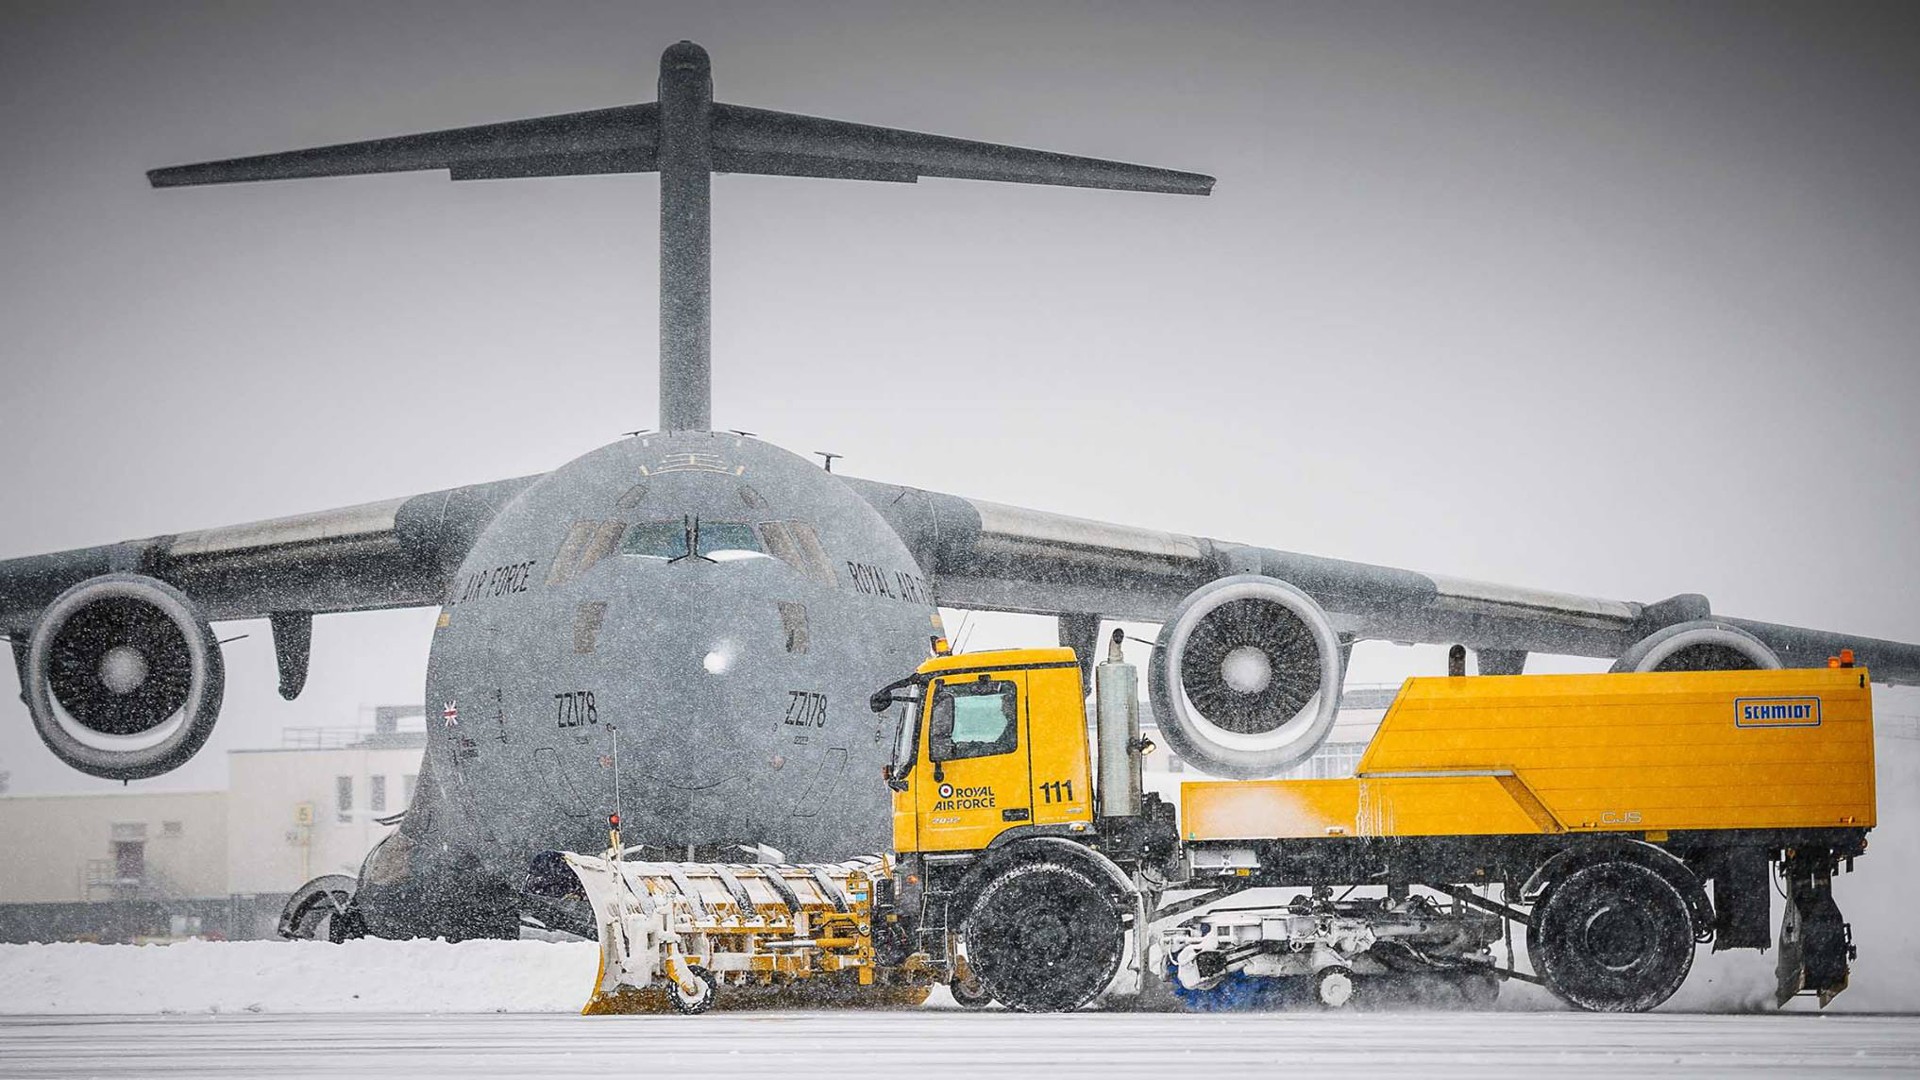 General 1920x1080 military Boeing C-17 Globemaster III snow truck aircraft military aircraft cold winter military vehicle vehicle yellow cars numbers snowing Royal Air Force American aircraft Boeing